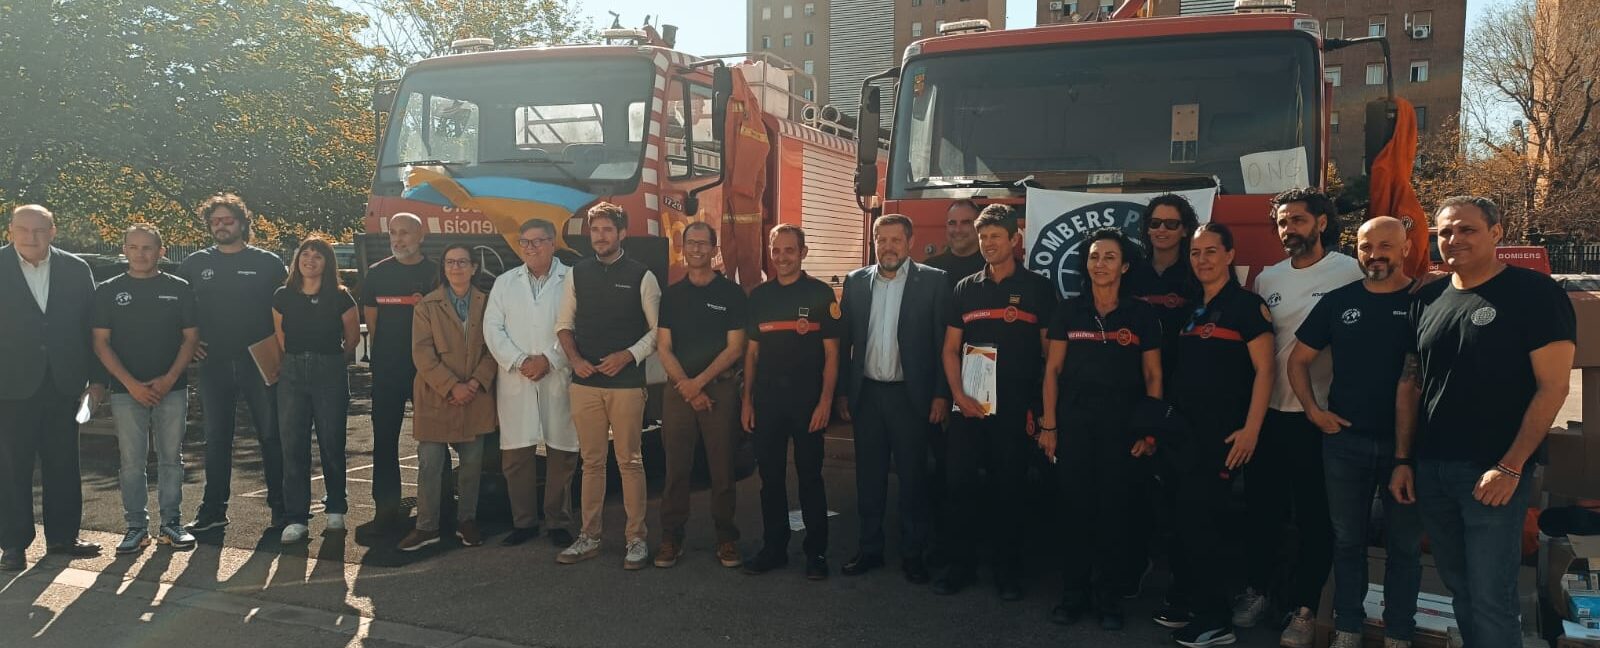 Federation of Associations of Ukrainians in Spain and Valencia community donate 2 fire trucks to Ukraine